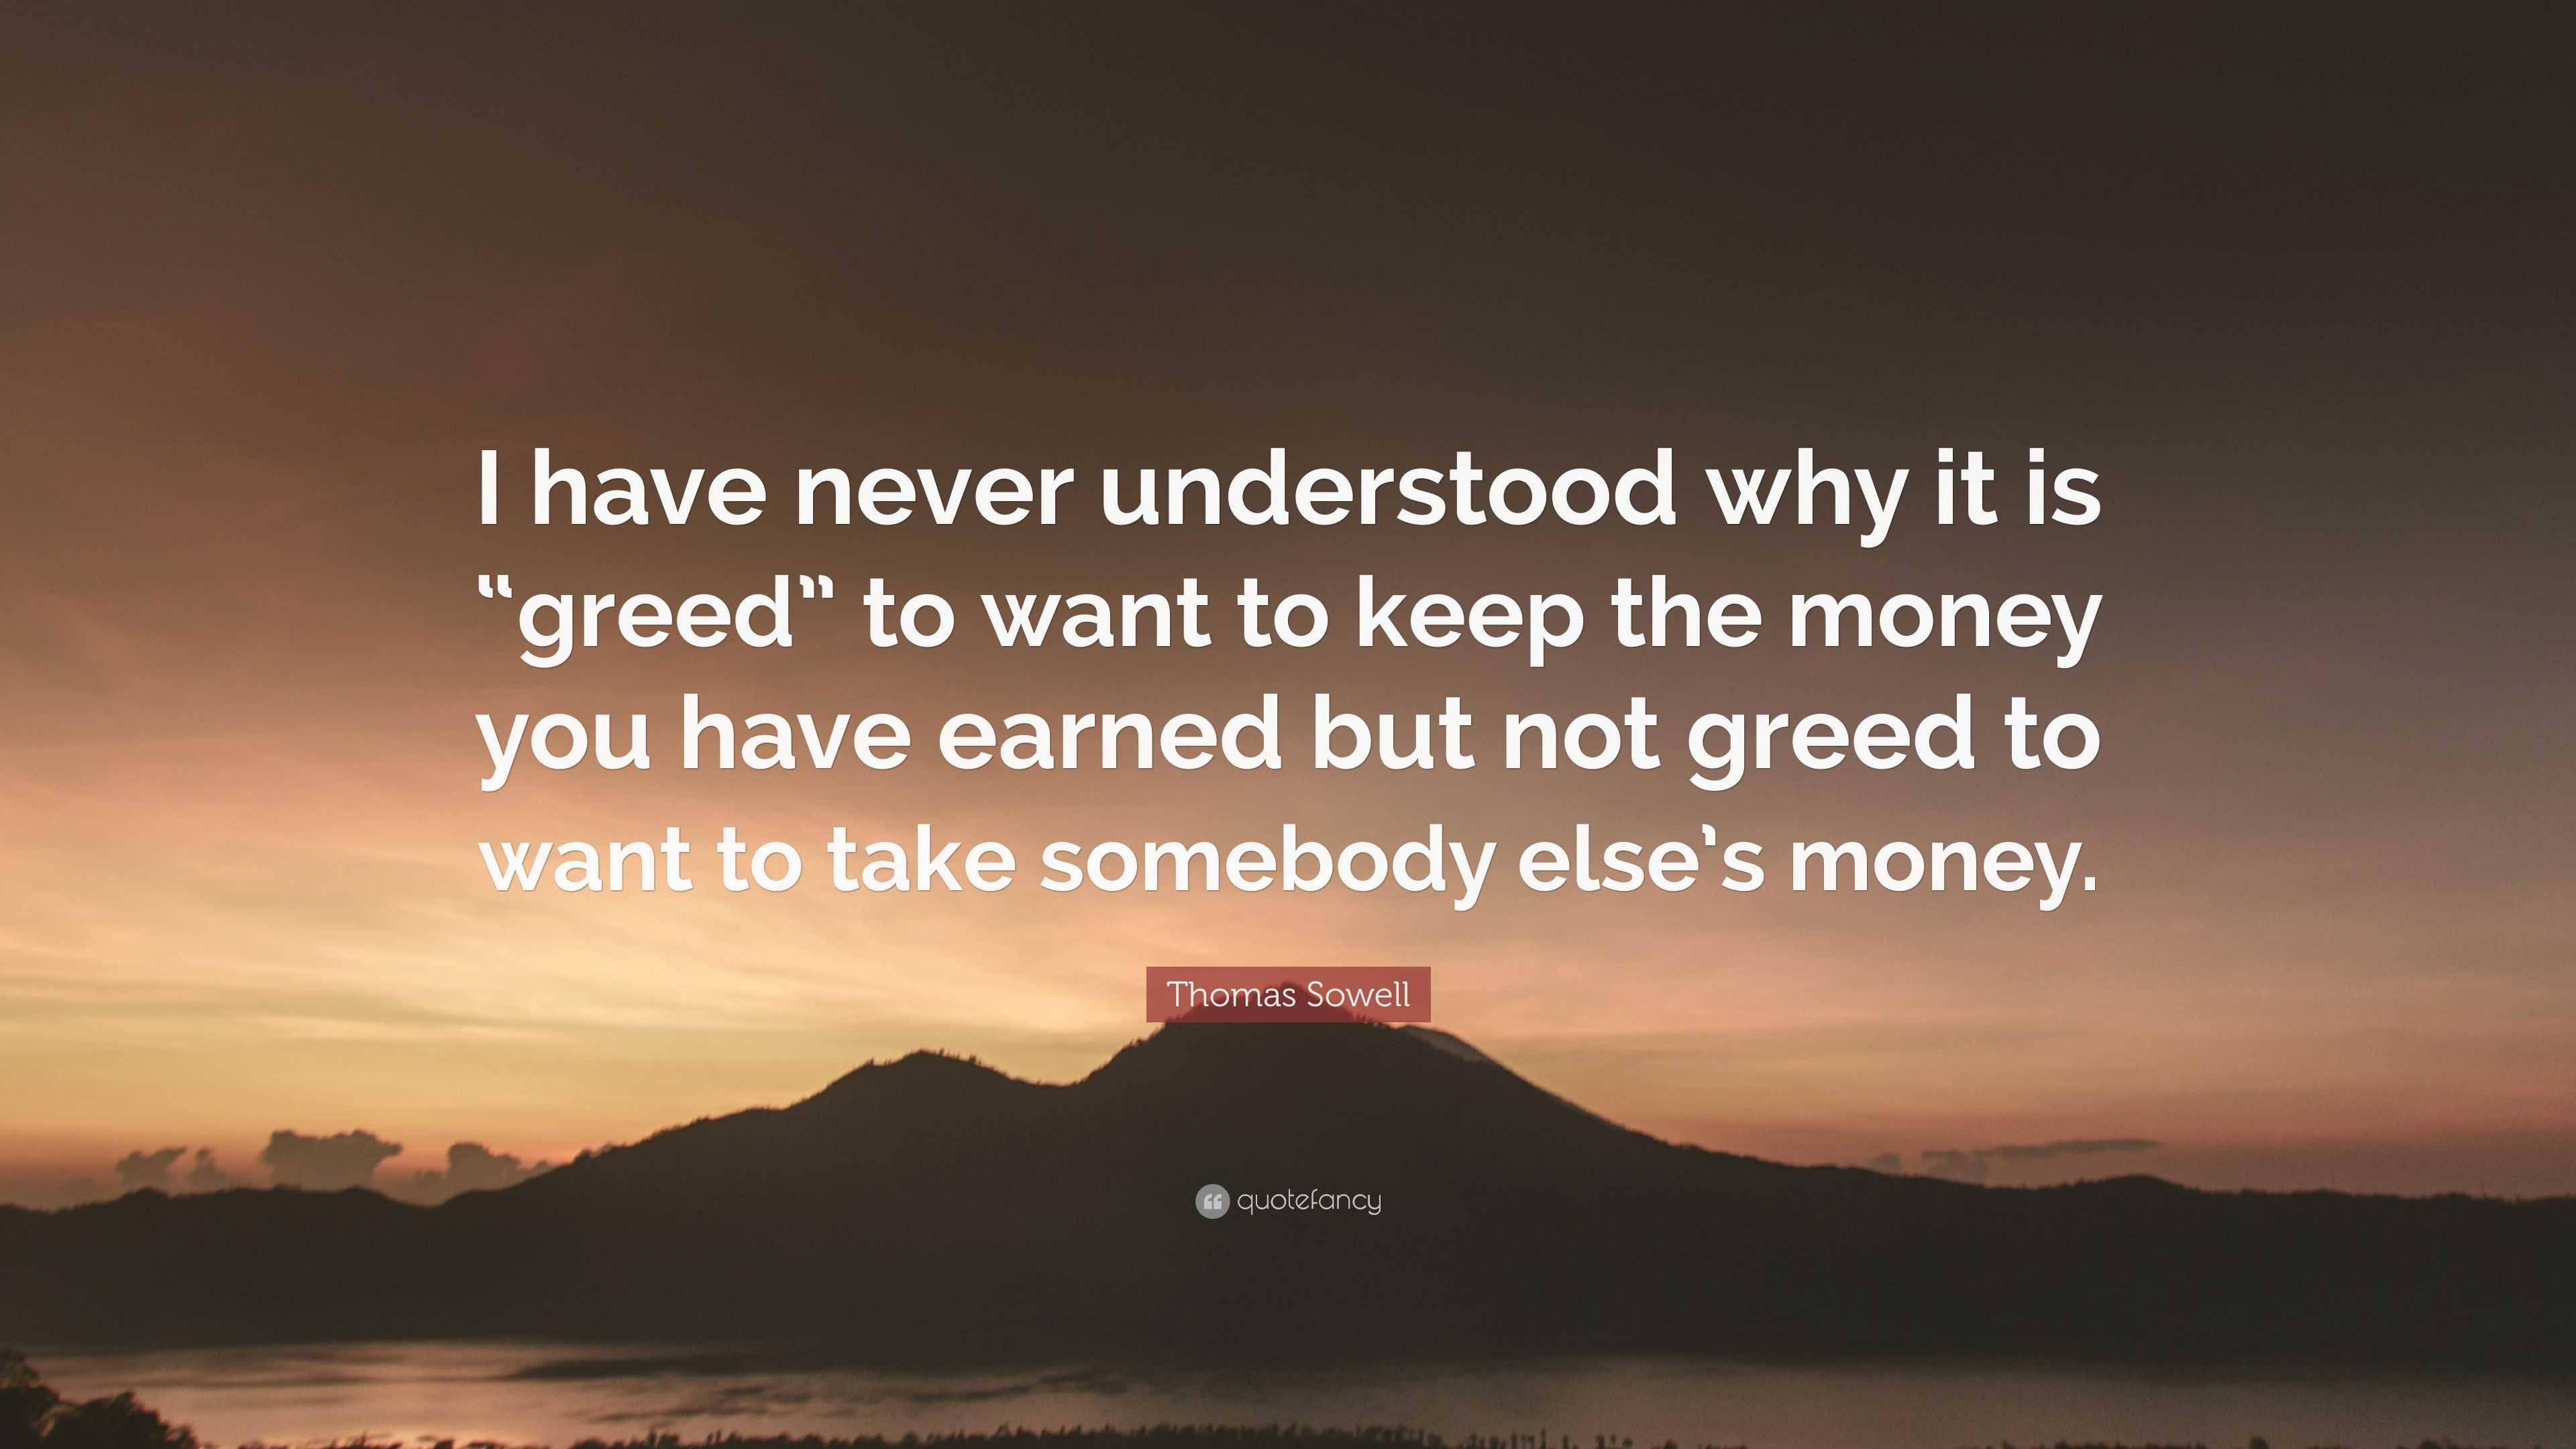 Thomas Sowell Quote: “I have never understood why it is “greed” to want